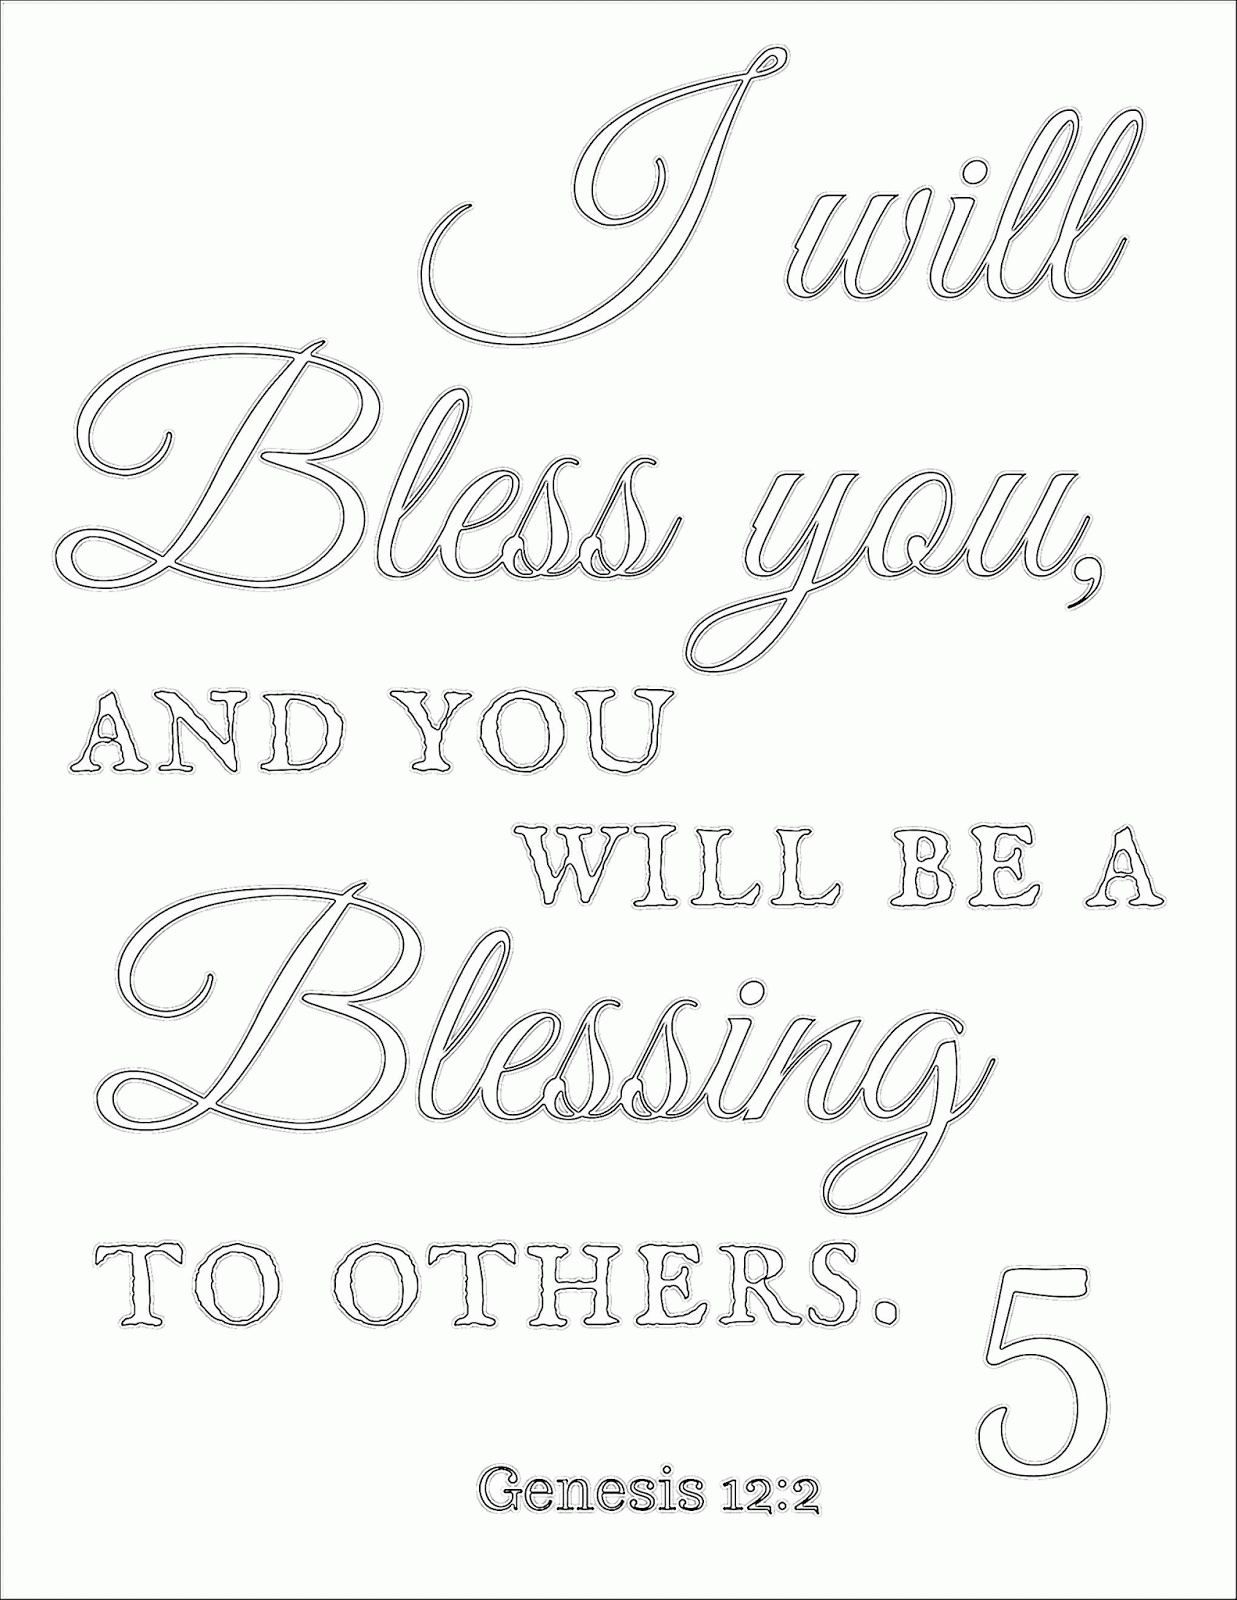 Jesse Tree Day 5 Scripture coloring page - The Prudent Pantry: Jesse Tree Scripture Coloring Pages